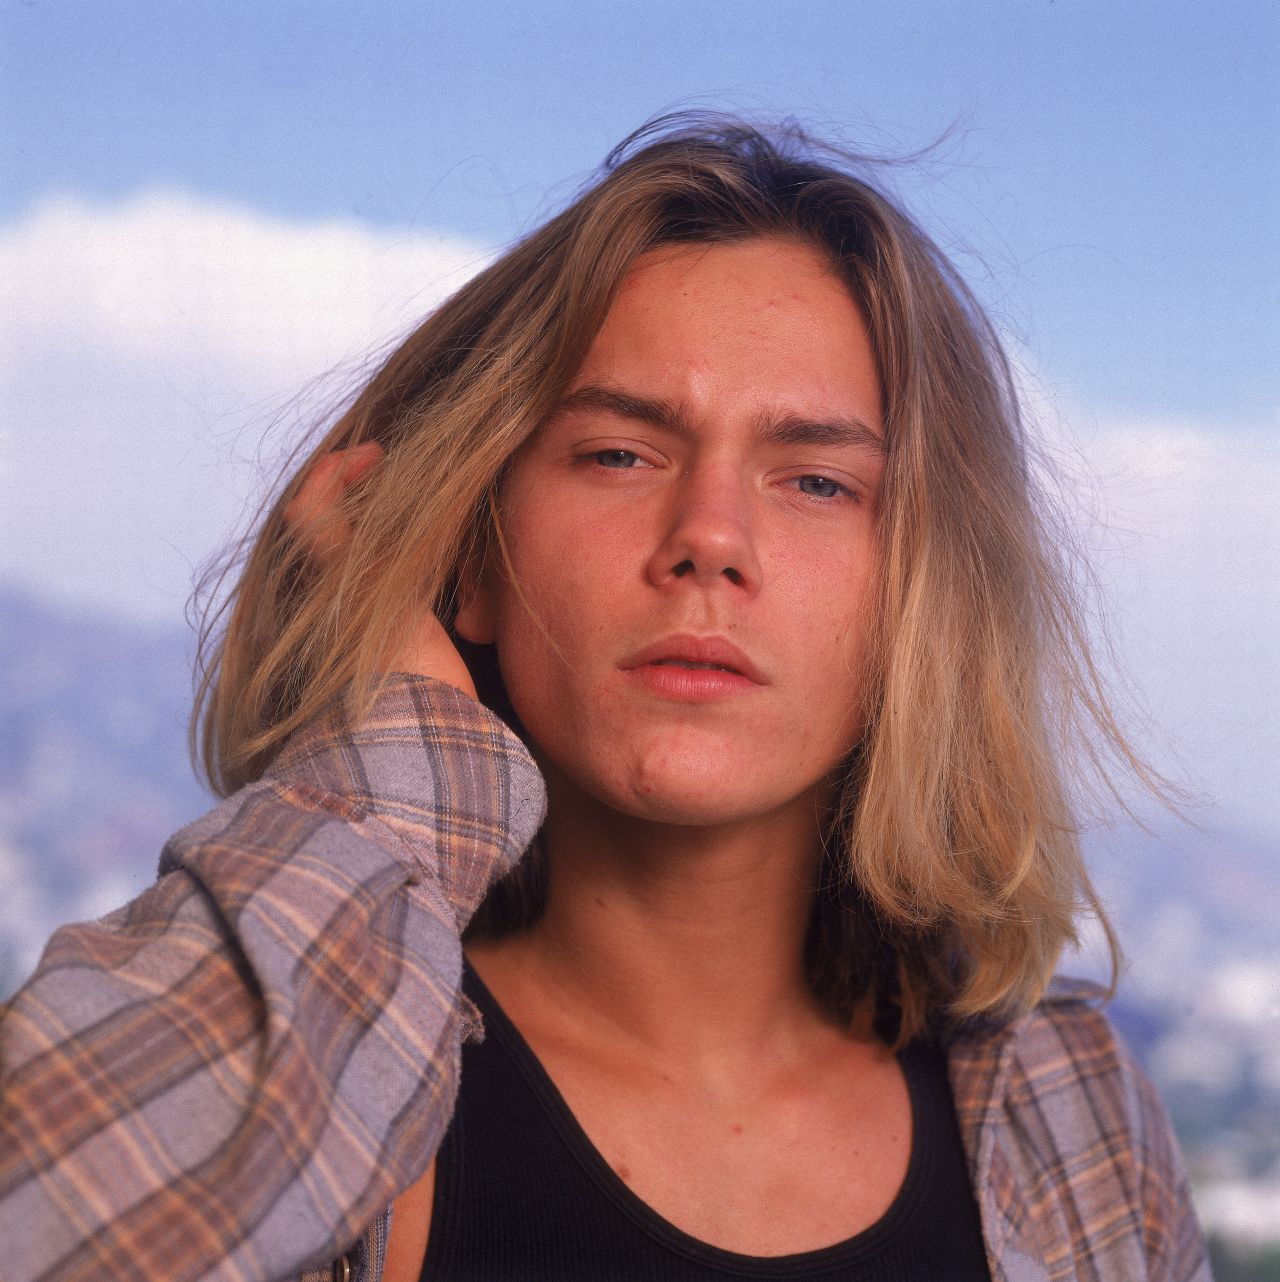 Actor River Phoenix collapsed and died outside Johnny Depp's West Hollywood nightclub on October 31, 1993, after consuming morphine and cocaine. He was 23 years old. 